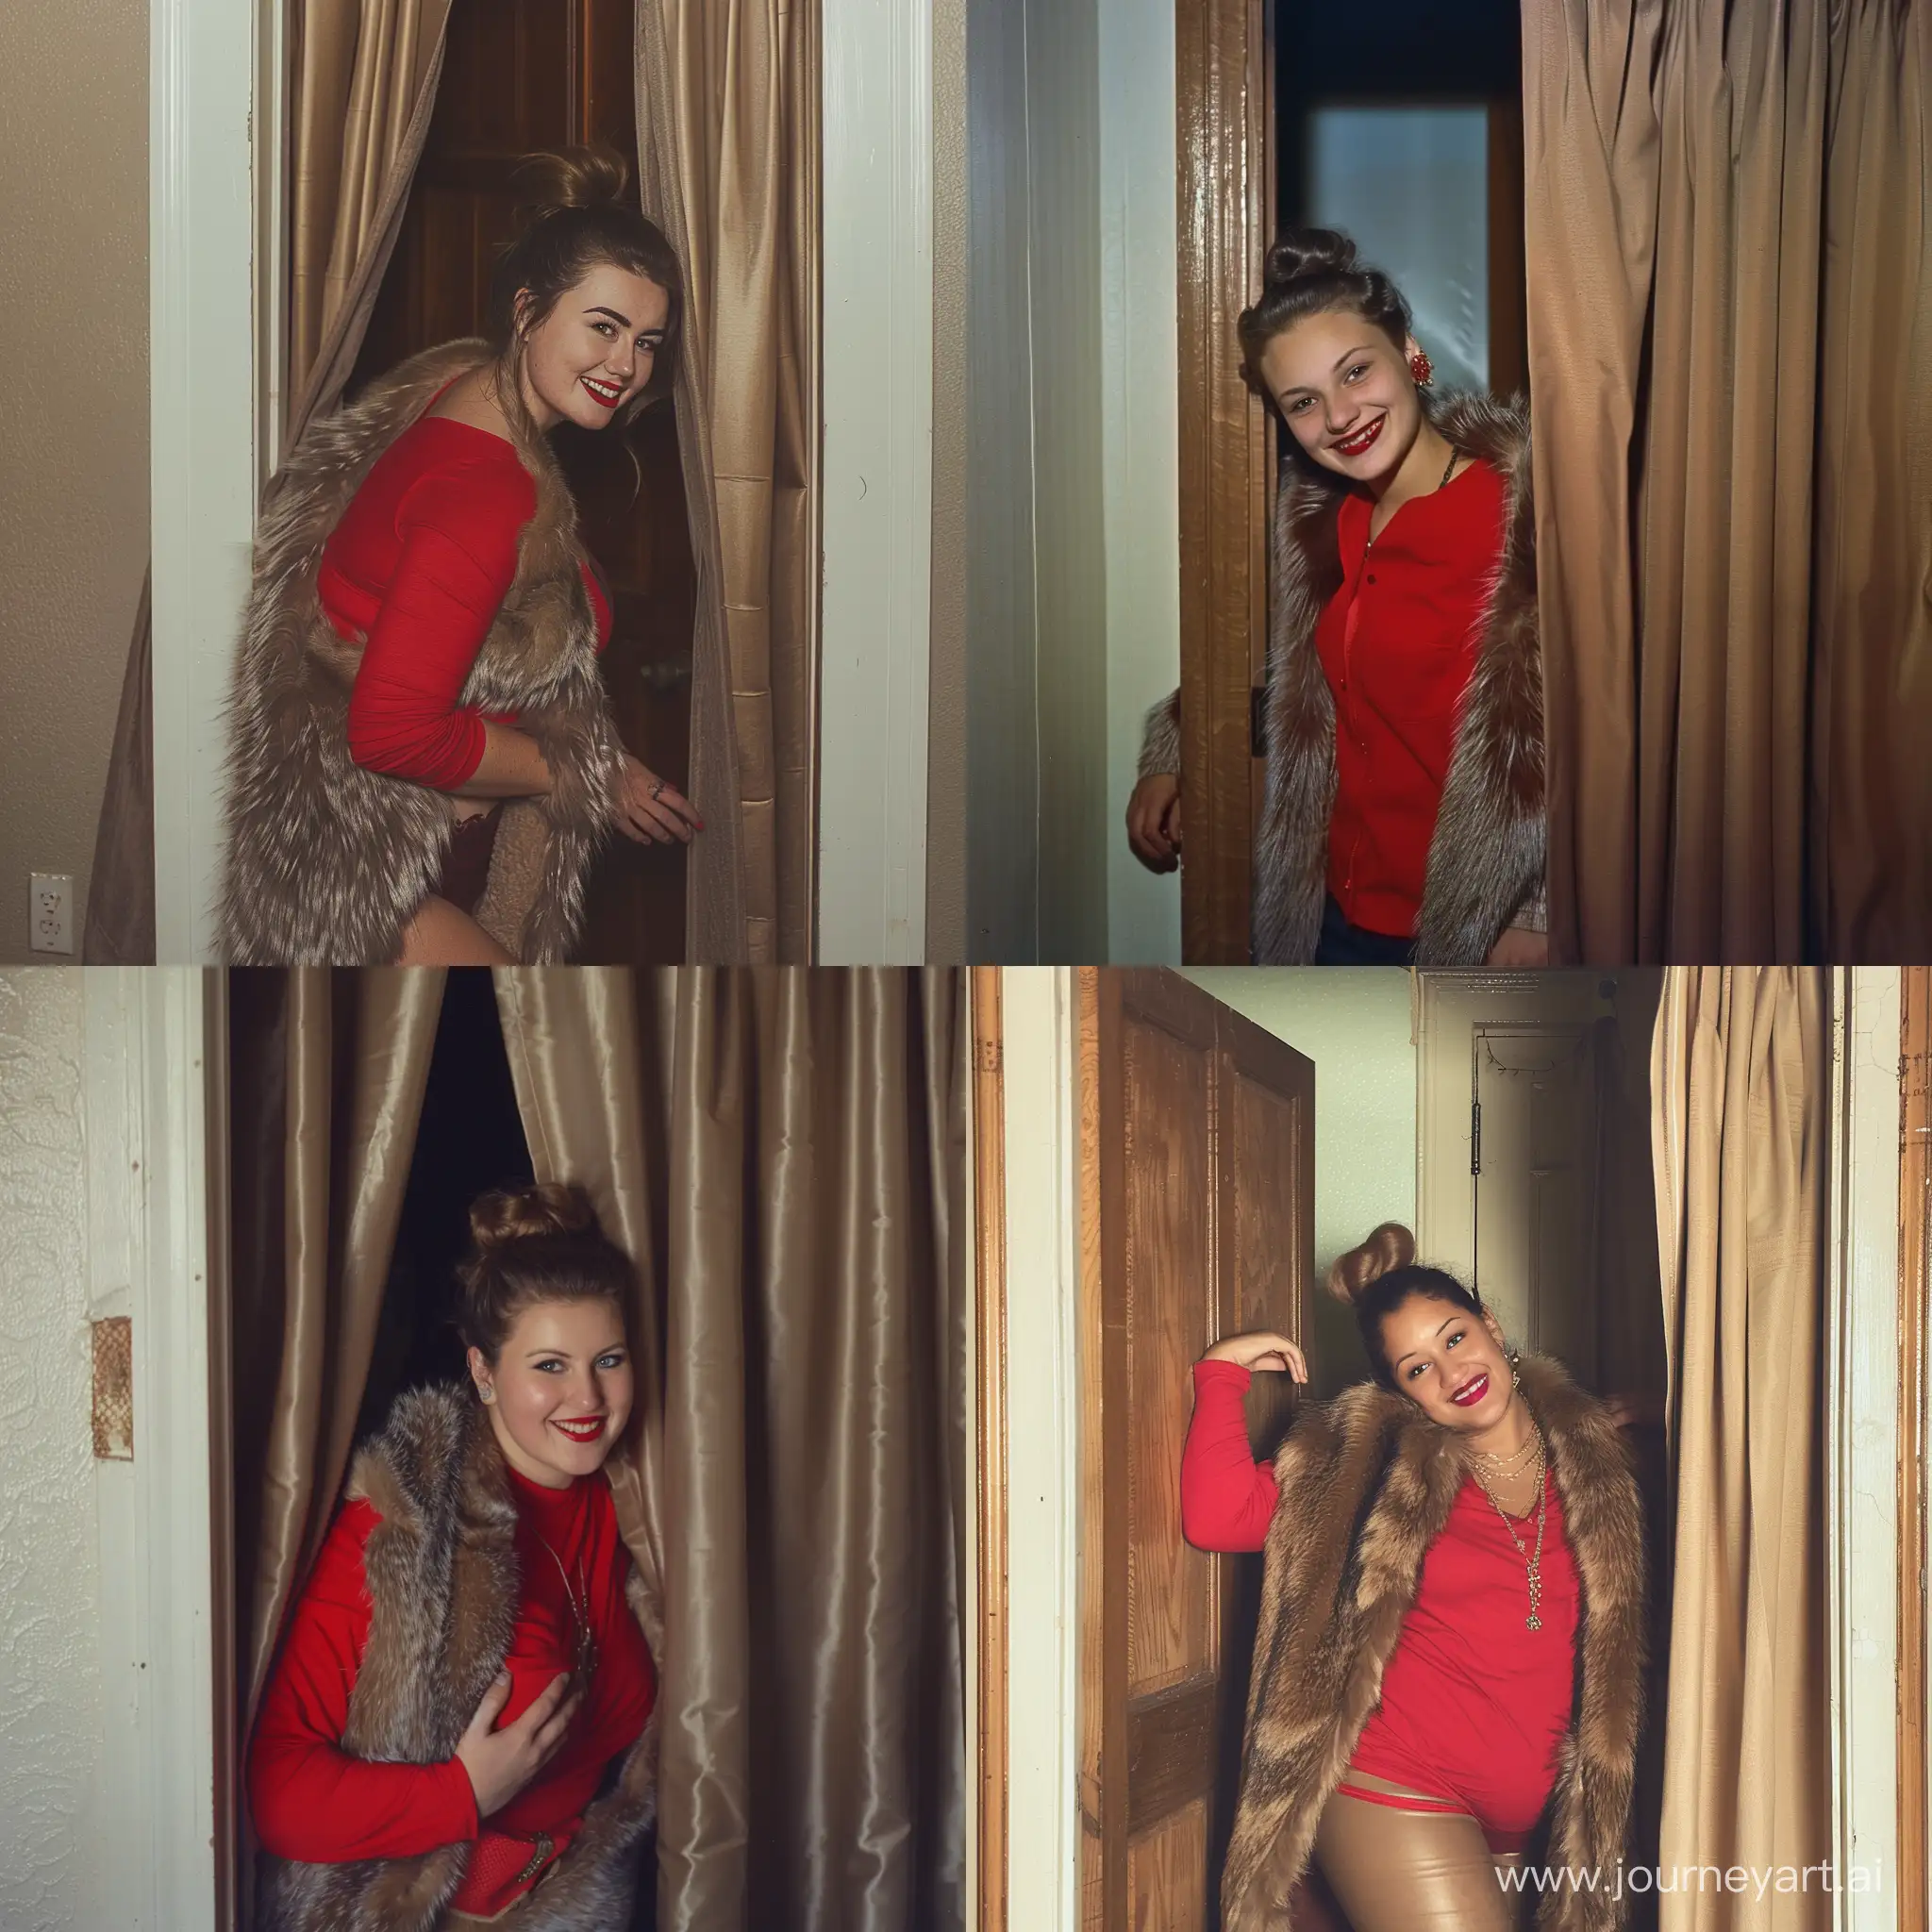 A woman wearing a red shirt and a fur coat is leaning against a doorway, posing for the camera. She has her hair in a bun and is smiling brightly. The doorway is covered with a curtain that hangs down to the floor.